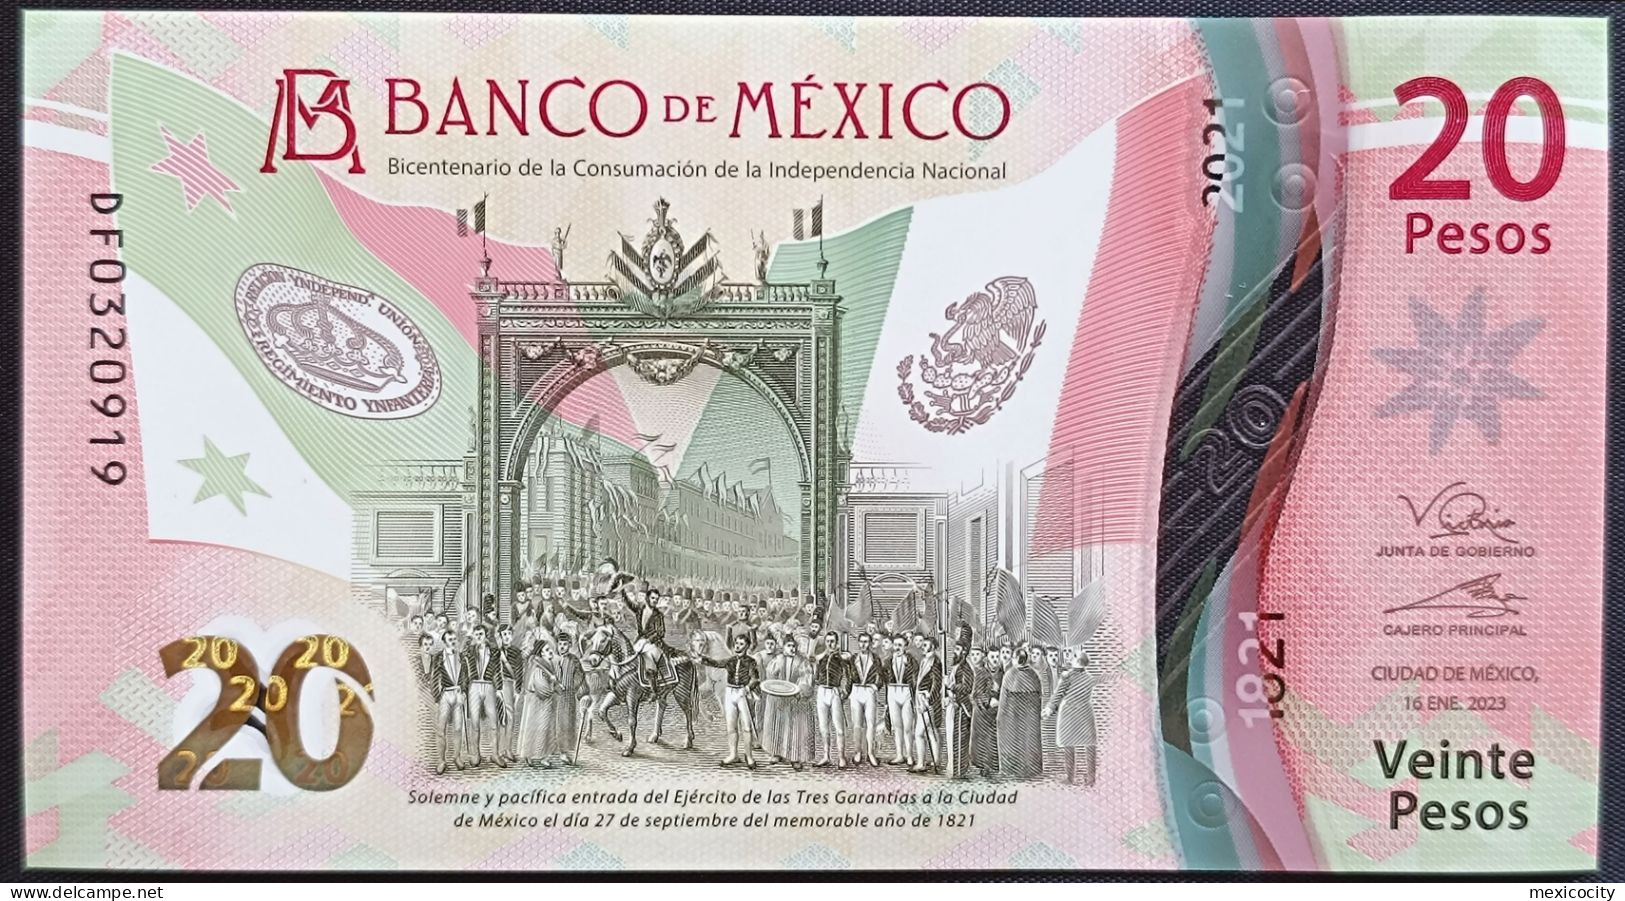 MEXICO $20 ! SERIES DF NEW 16-JAN-2023 DATE ! Victoria Rod. Sign. INDEPENDENCE POLYMER NOTE Read Descr. For Notes - México